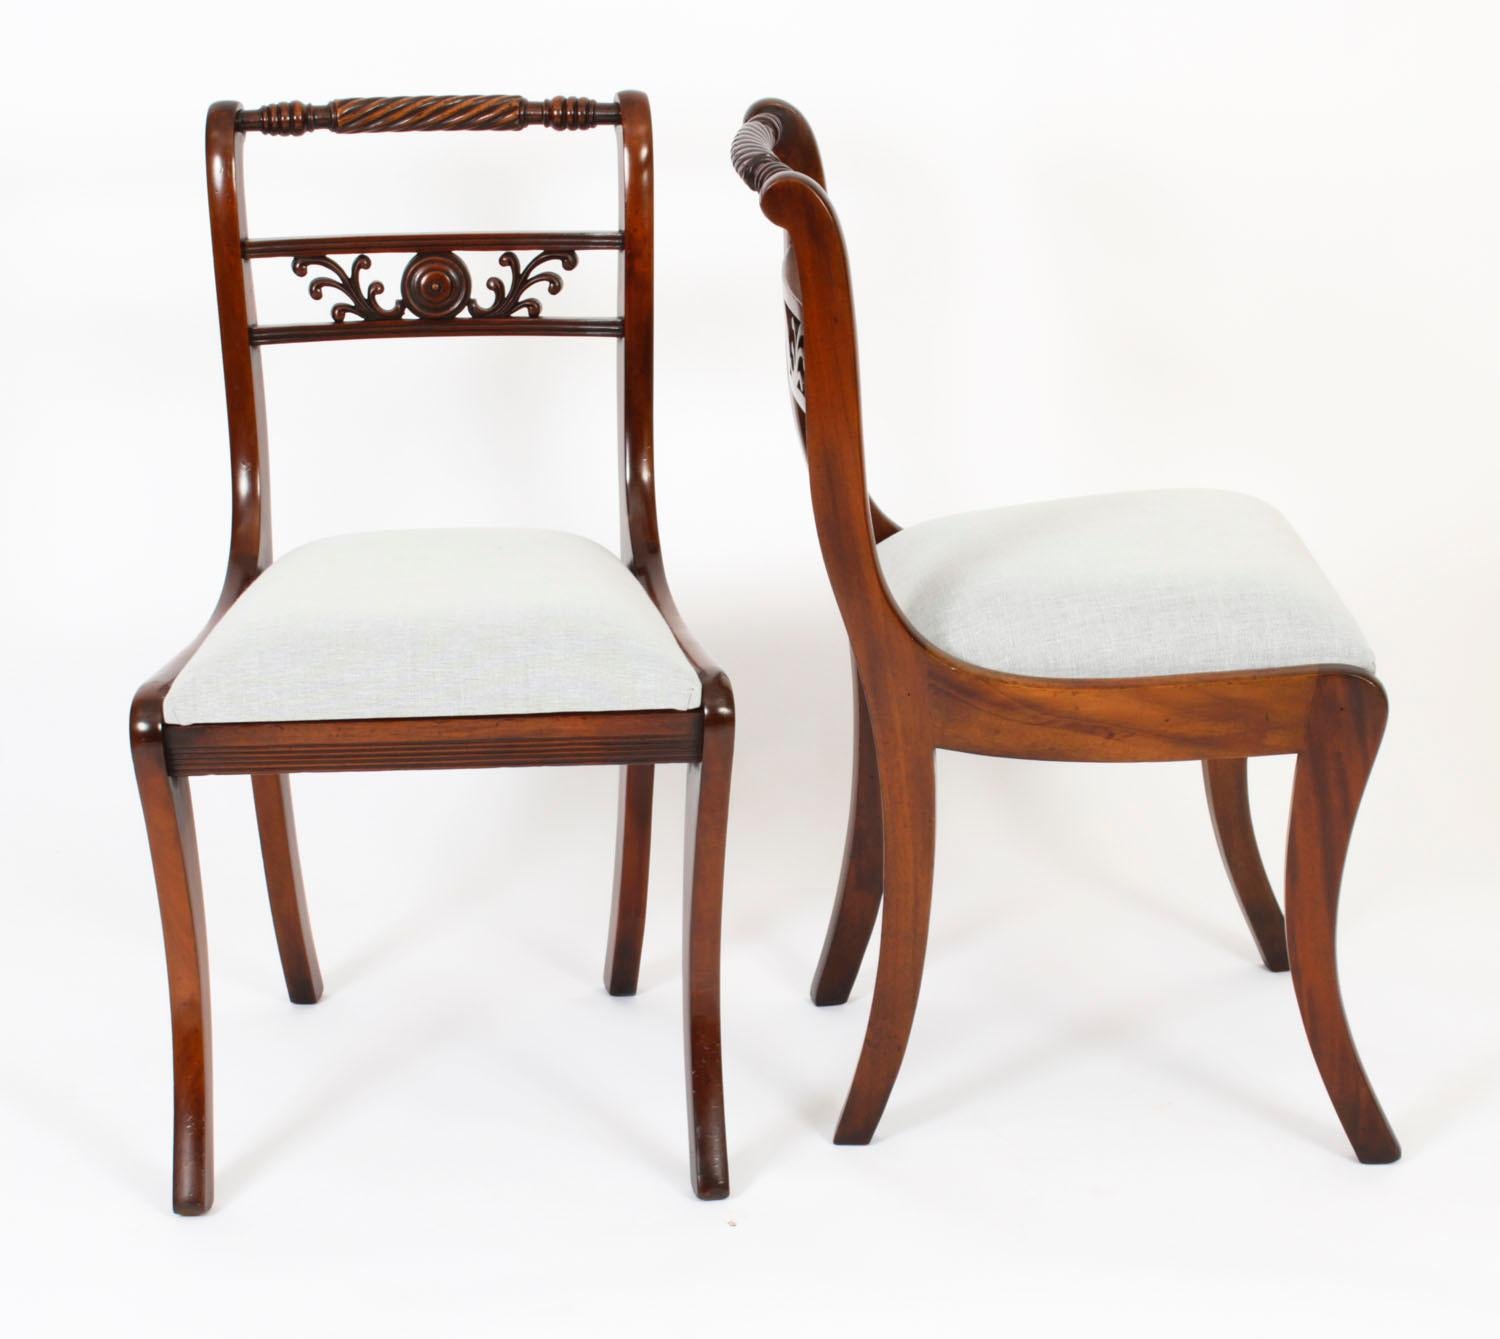 An absolutely fantastic Vintage set of ten Regency Revival dining chairs dating from the second half of the  20th Century.

These chairs have been masterfully crafted in beautiful solid flame mahogany throughout and the finish and attention to